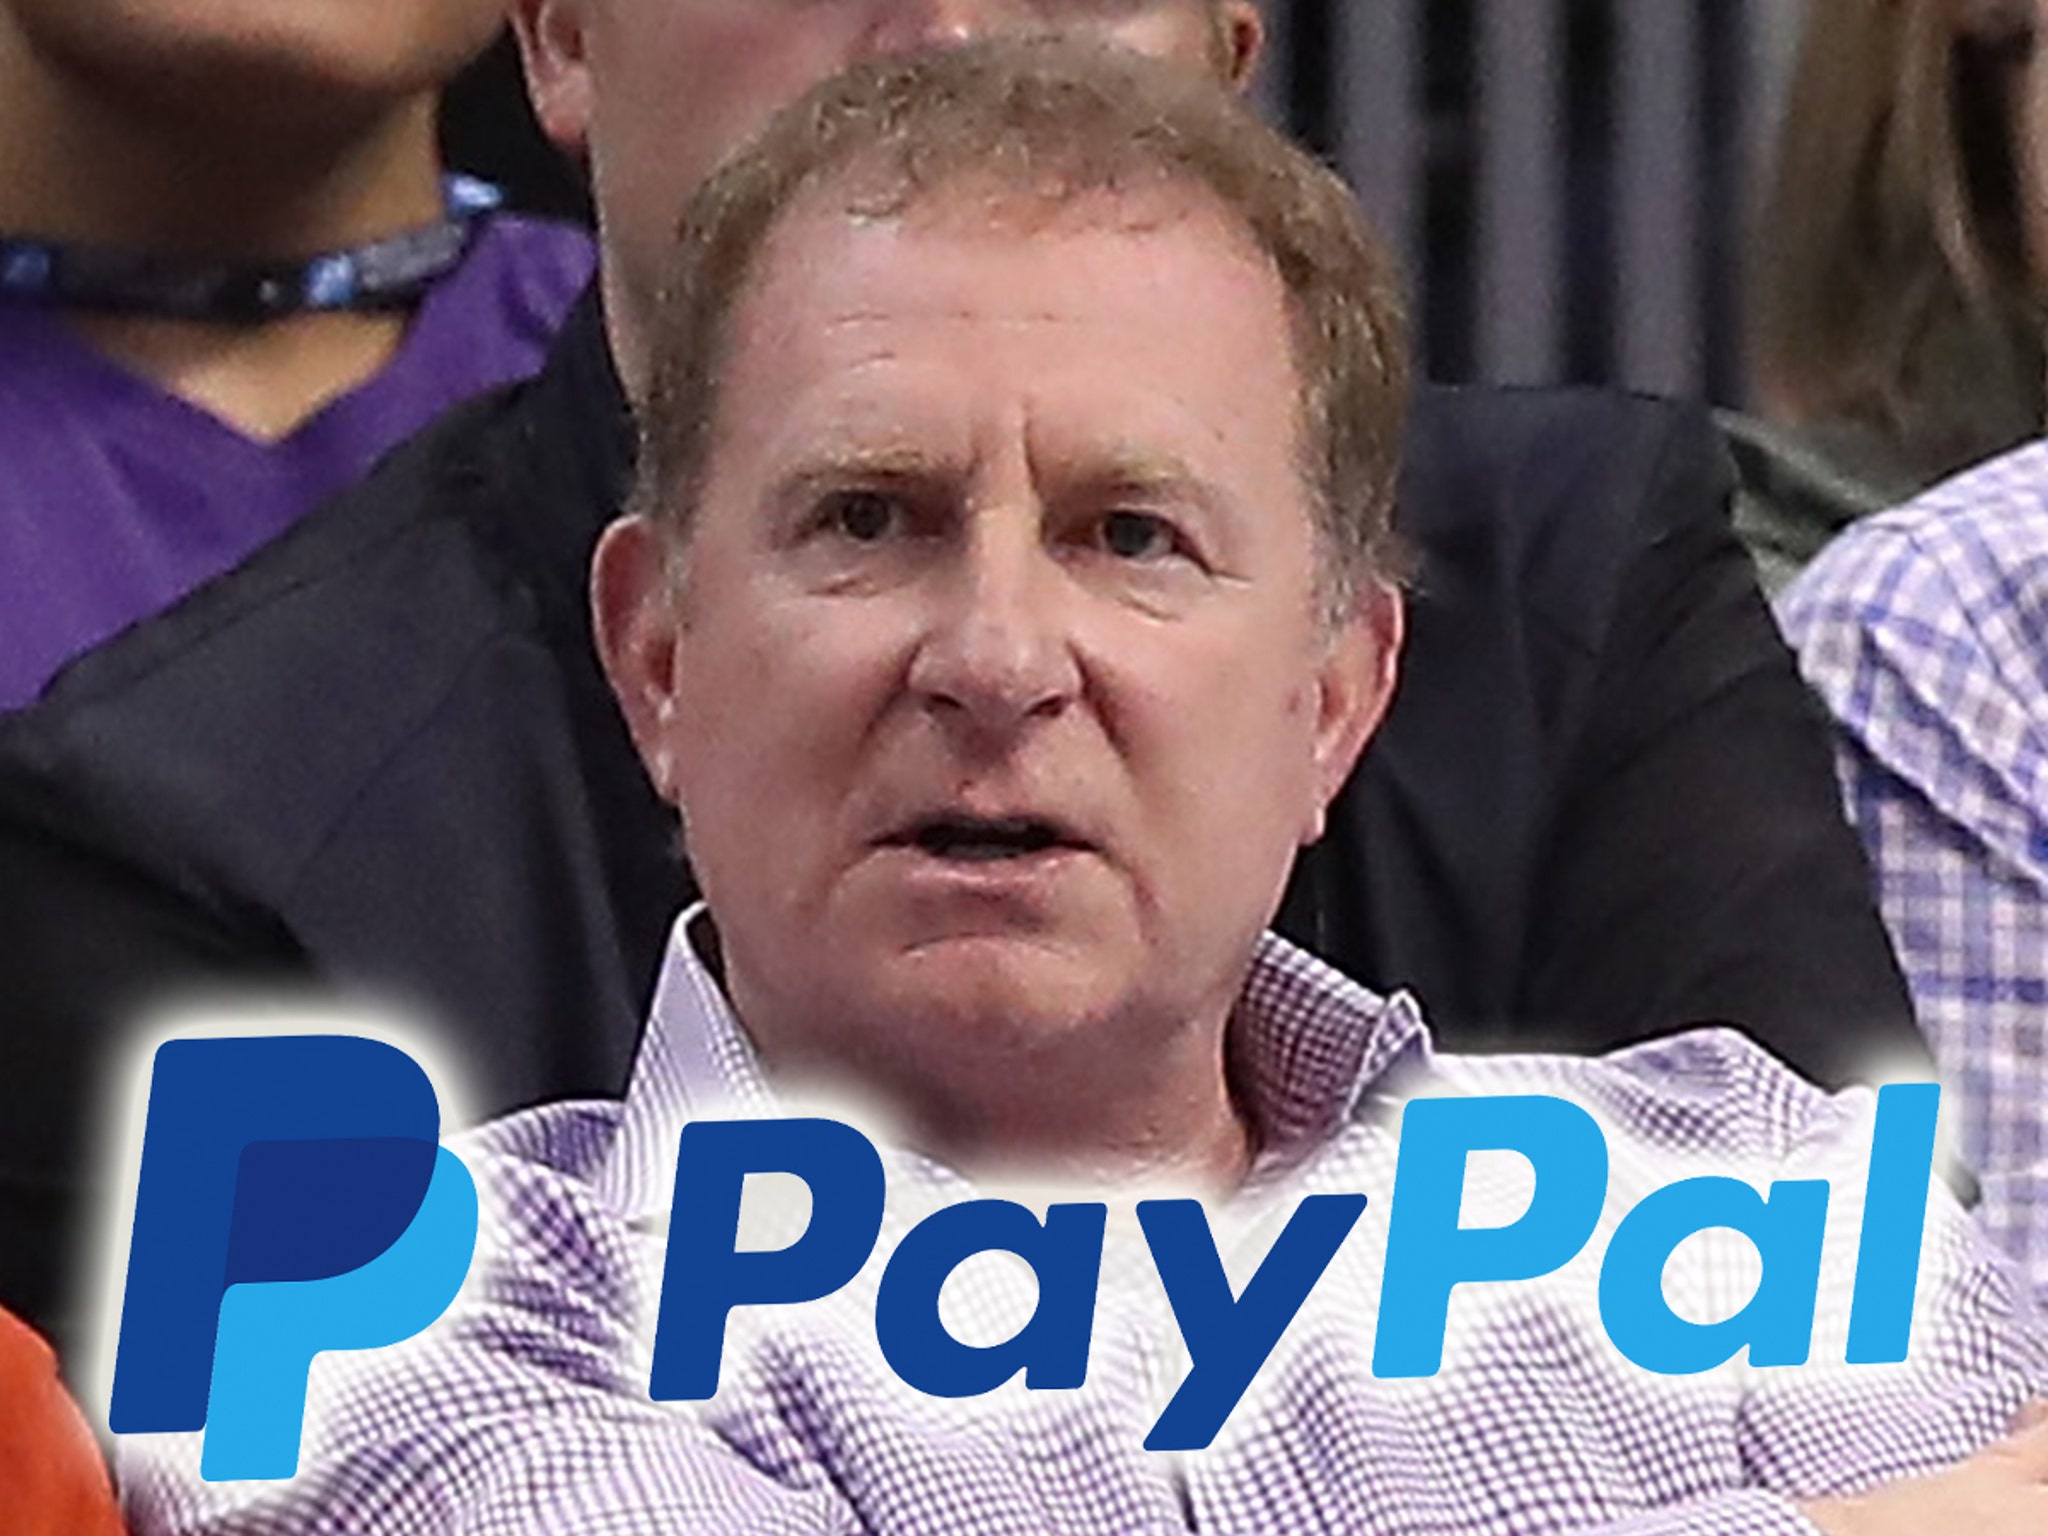 PayPal will not renew Suns jersey sponsorship deal if Sarver still involved  - NBC Sports